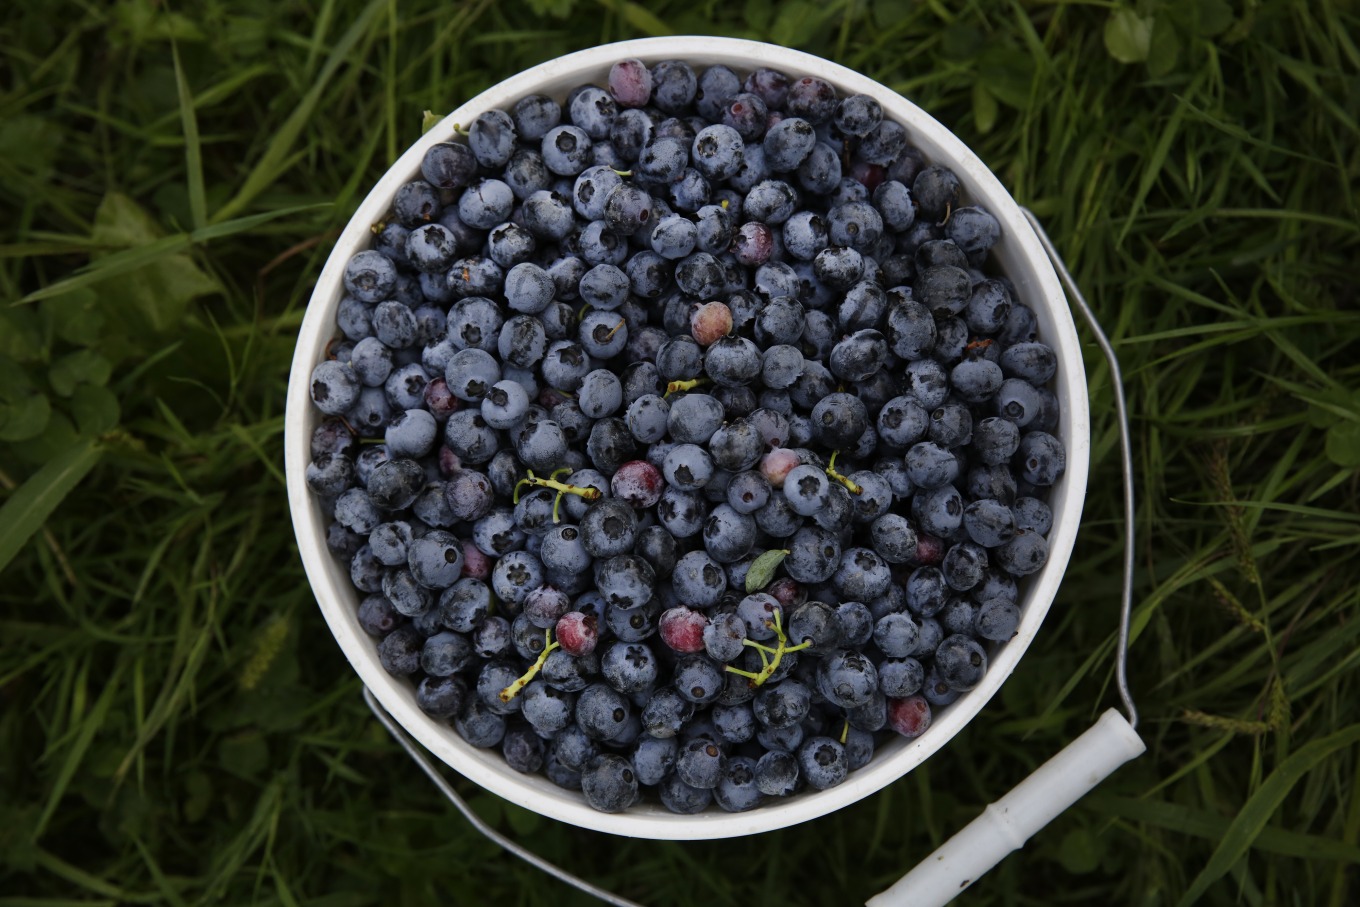 A bucket of blueberries.